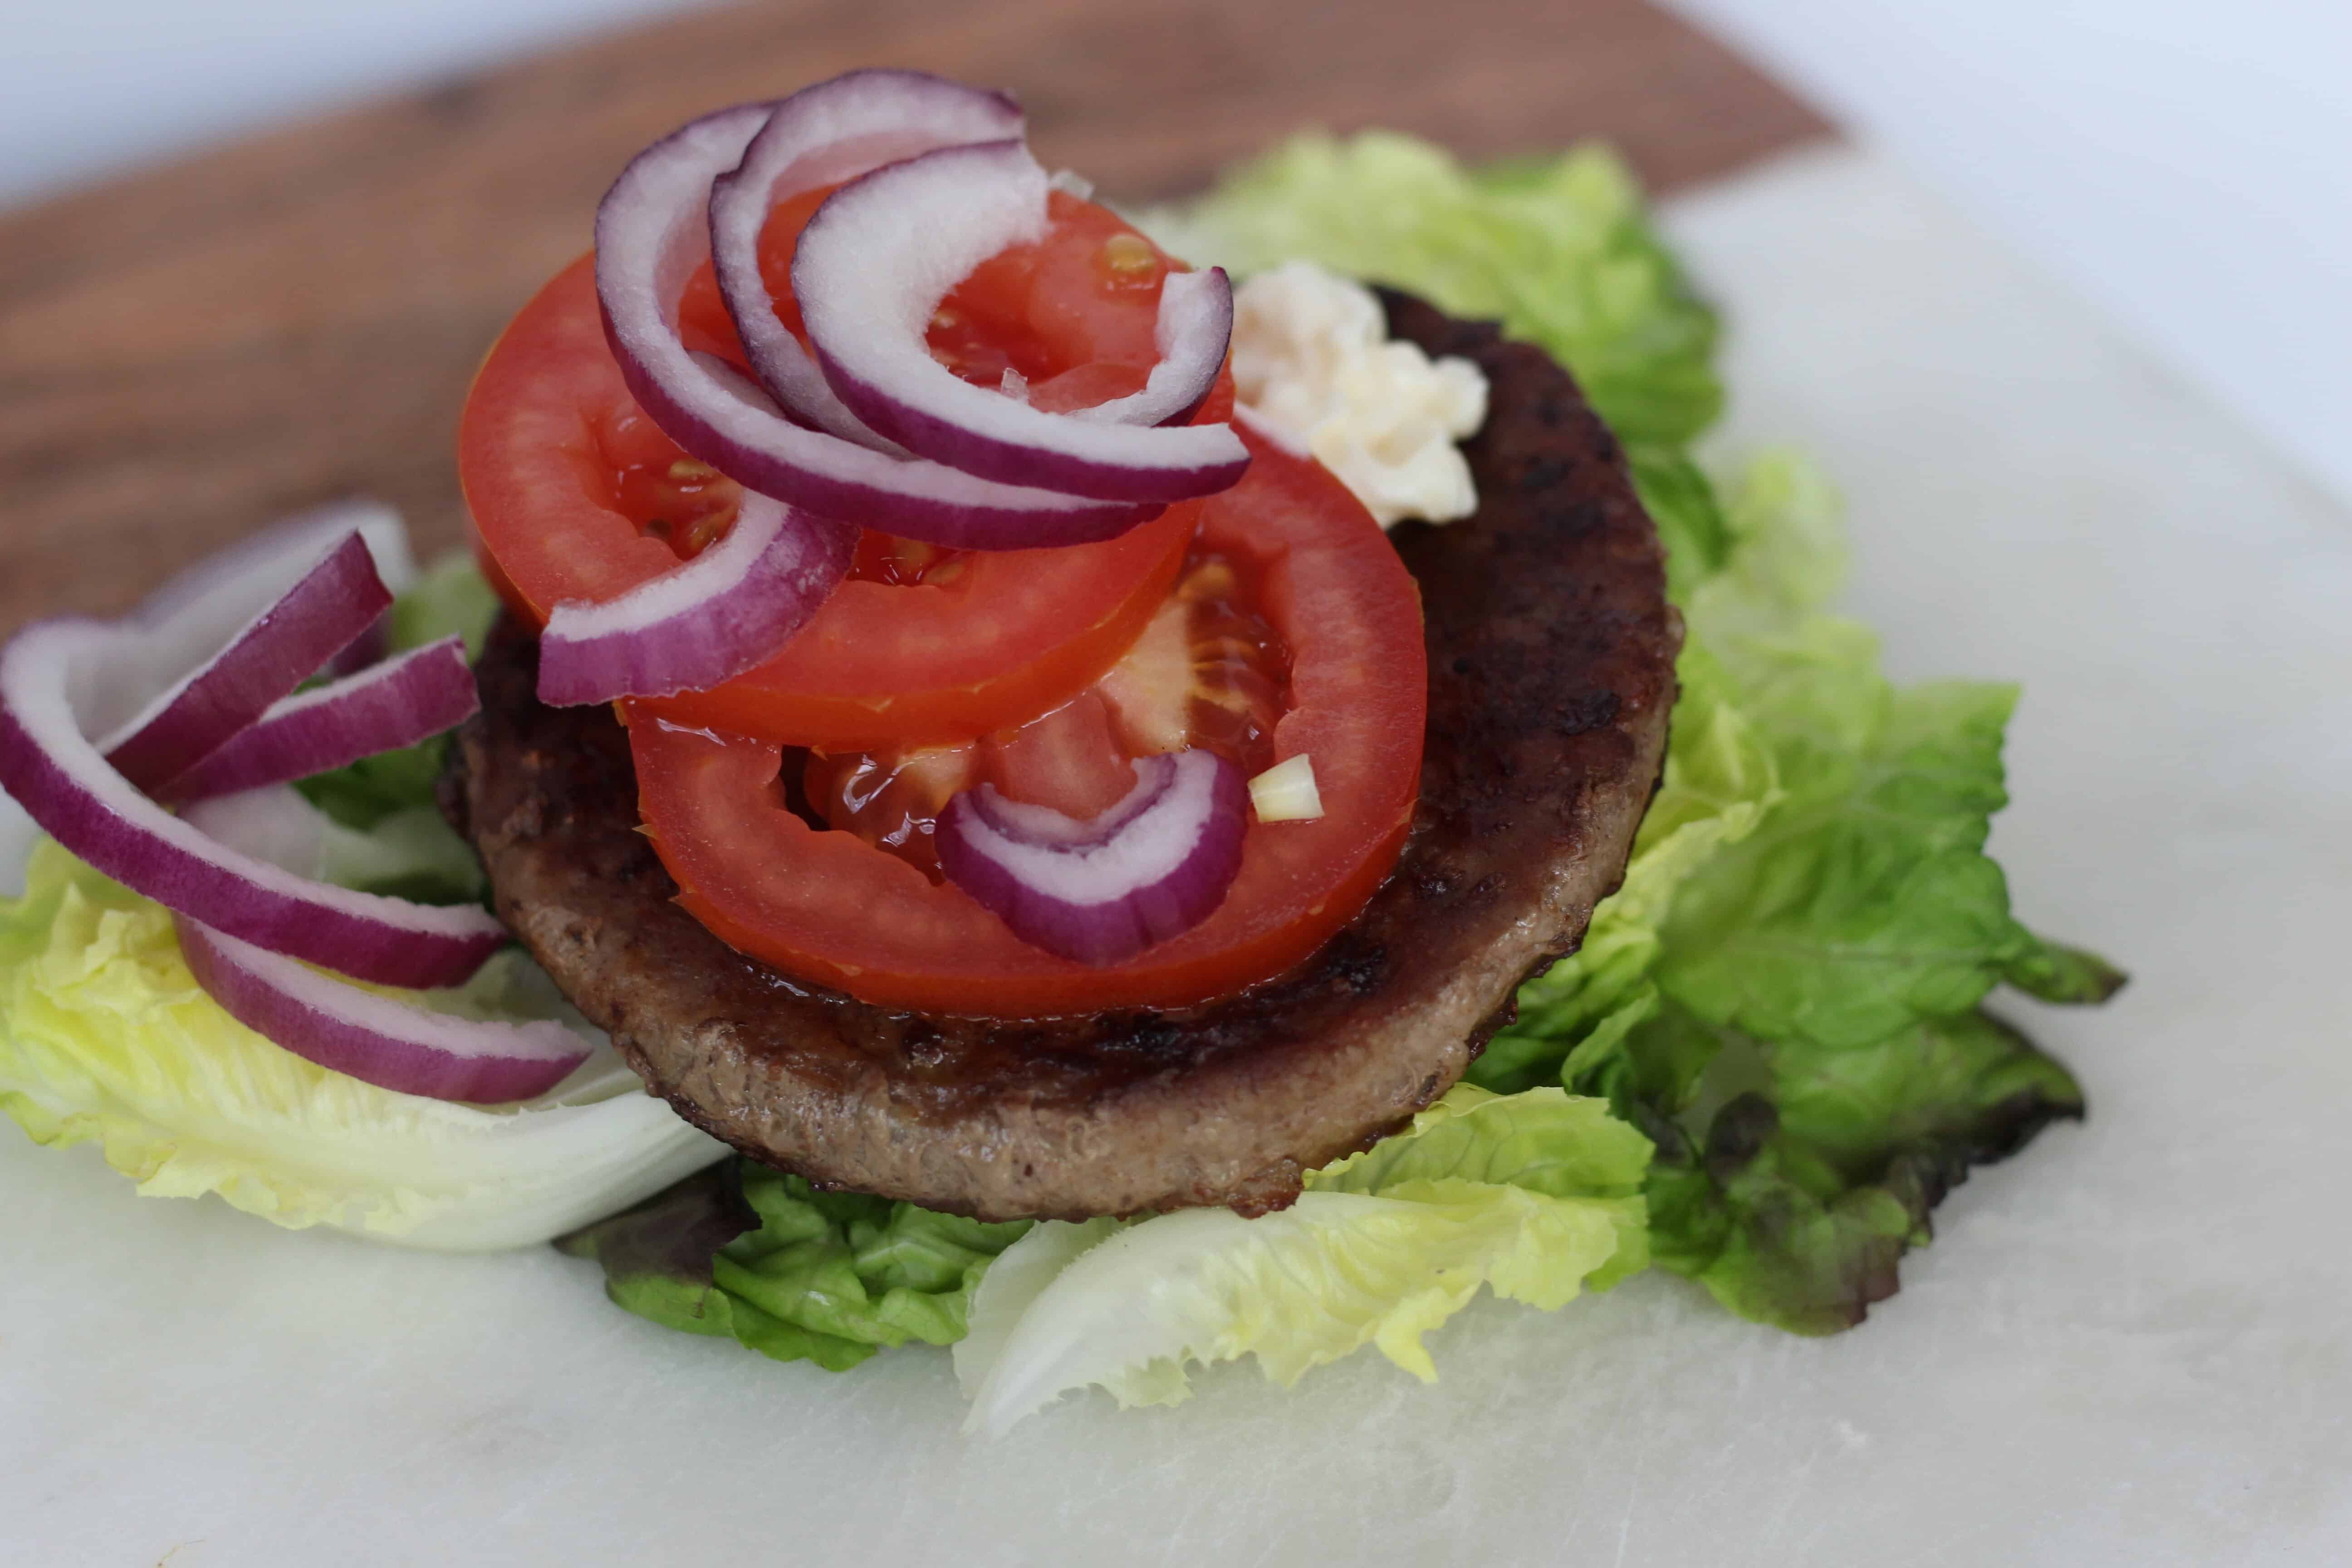 A burger patty topped with a red tomato, feta cheese and red onion lies atop romaine lettuce